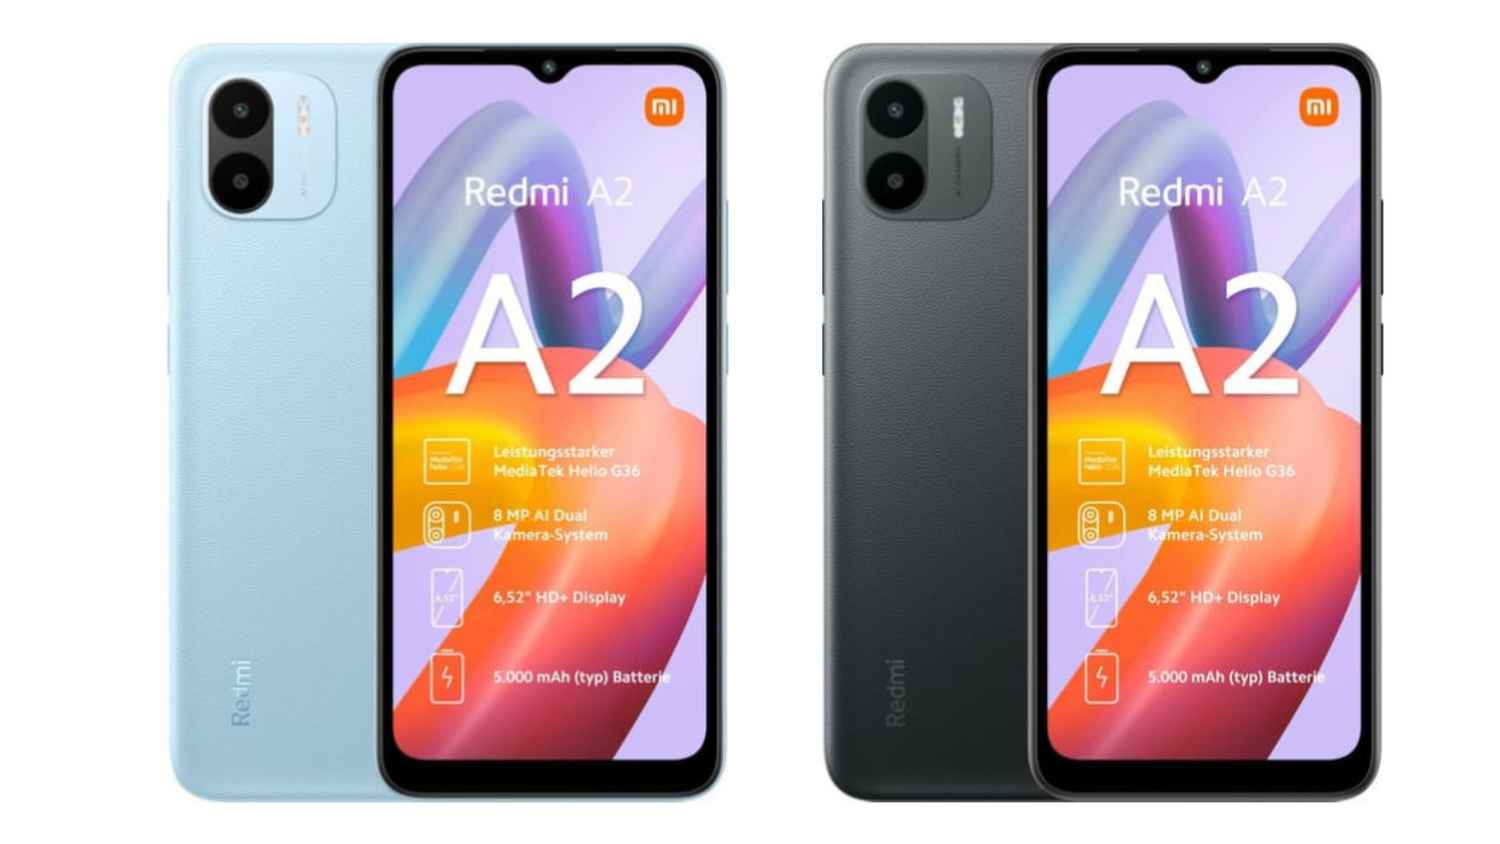 Here are the 5 features of the newly launched Redmi A2 and the Redmi A2 Plus